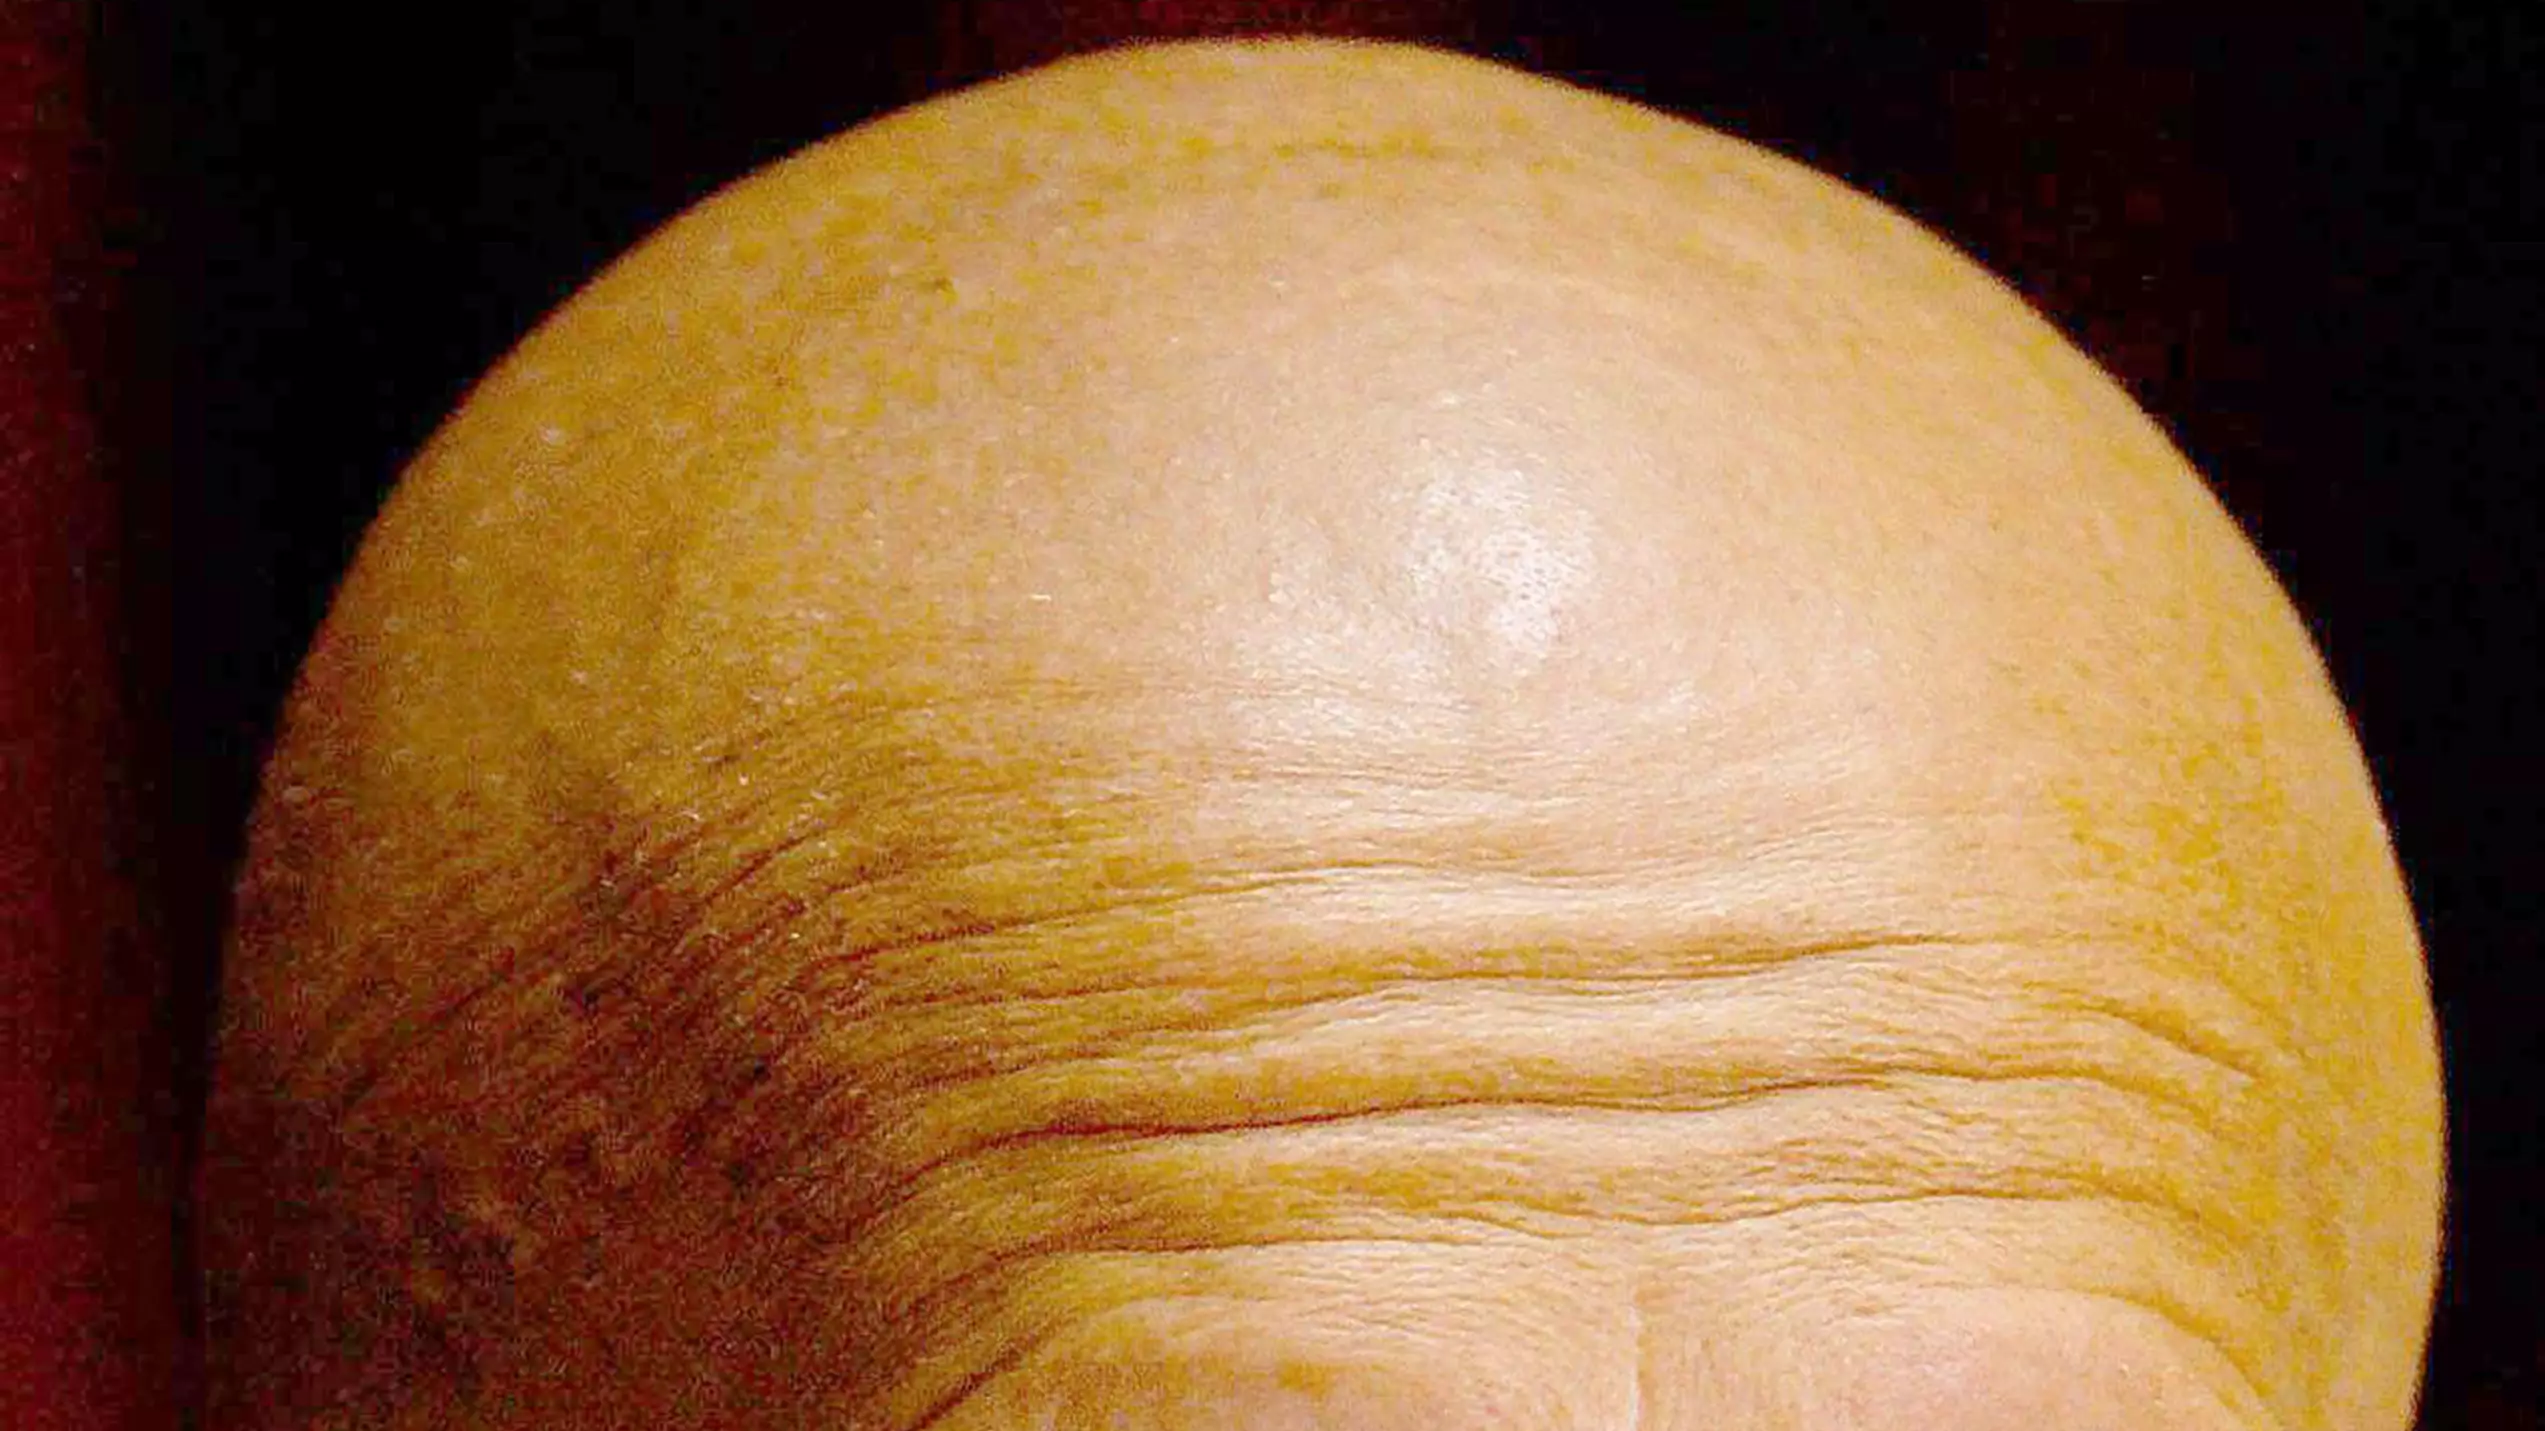 Scientists Reckon That They Might Have Discovered A Cure For Baldness